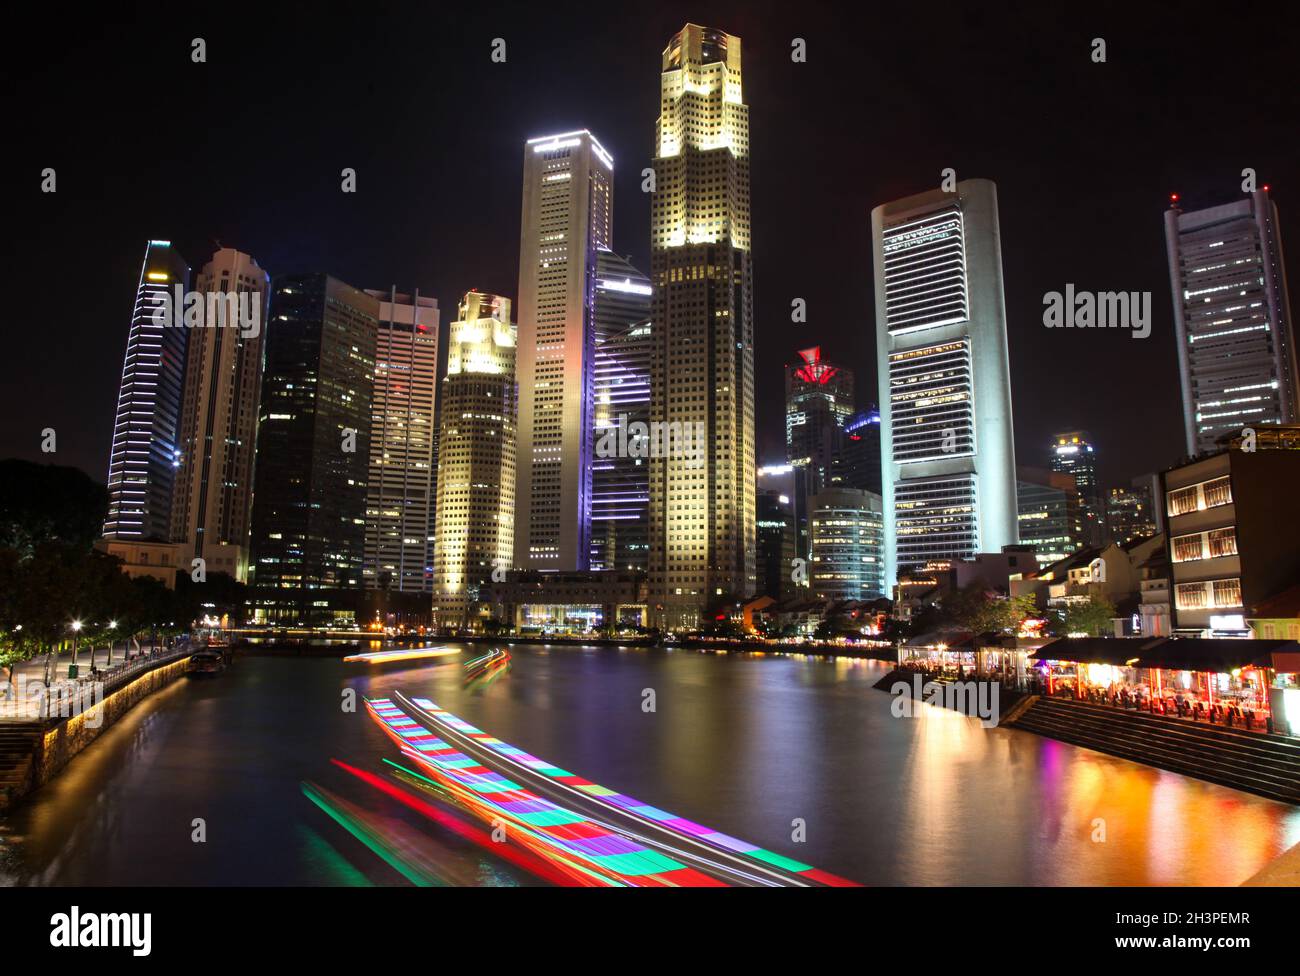 Night time in Singapore at South Bridge Road showing illuminated buildings and light trail from tourist boats cruising the Singapore river. Stock Photo